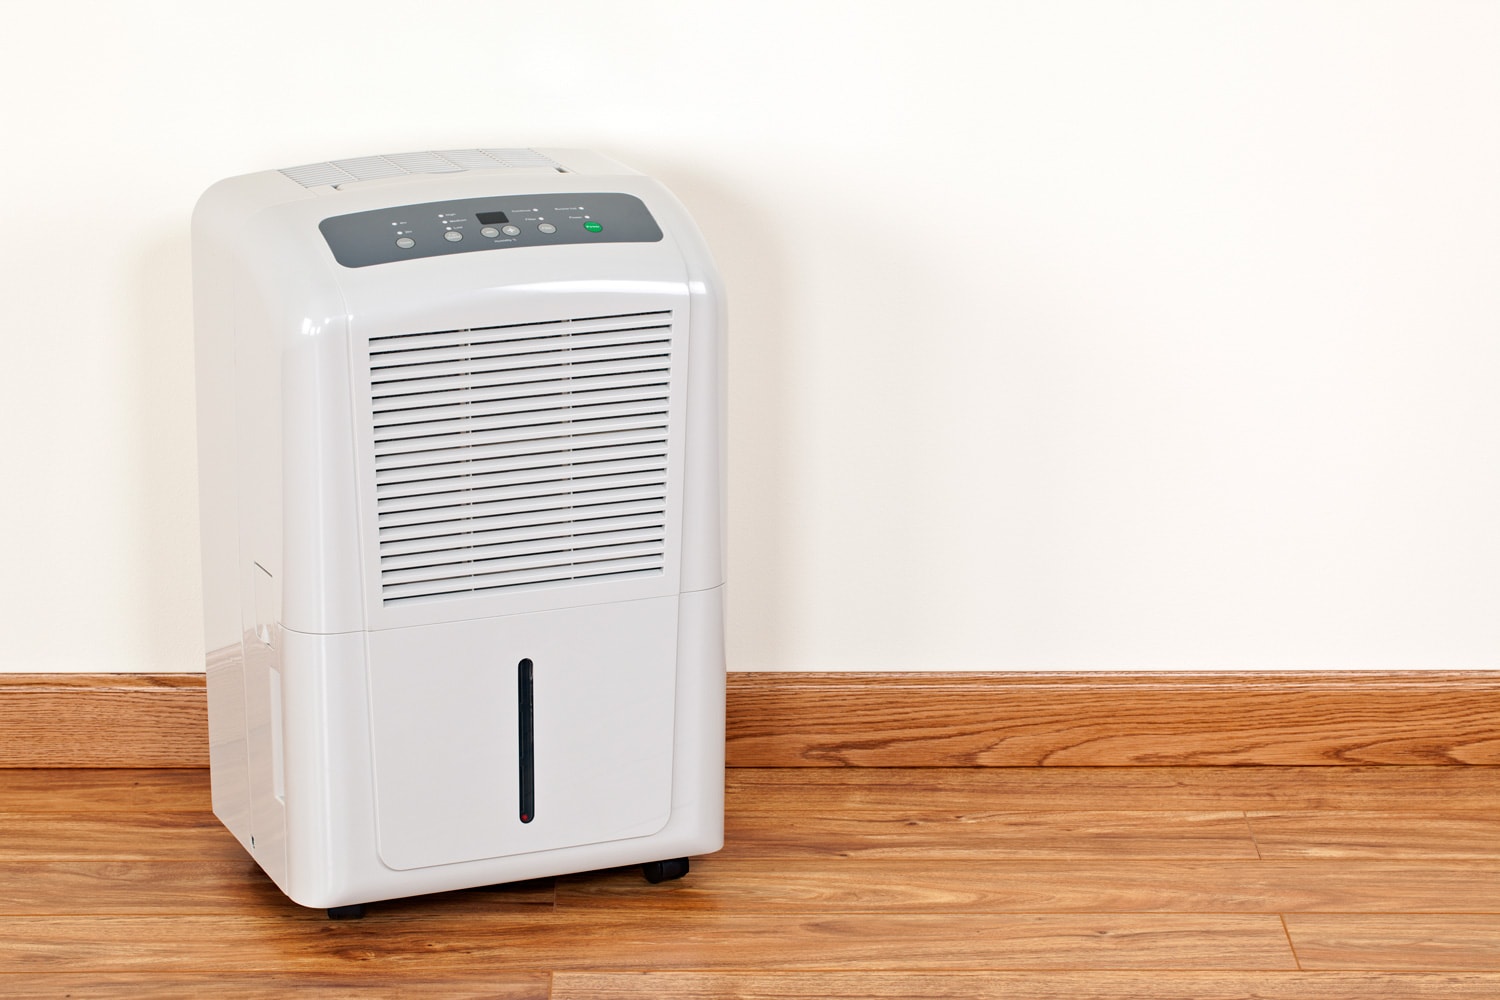 Dehumidifiers extract moisture from the air to reduce the level of humidity in the area